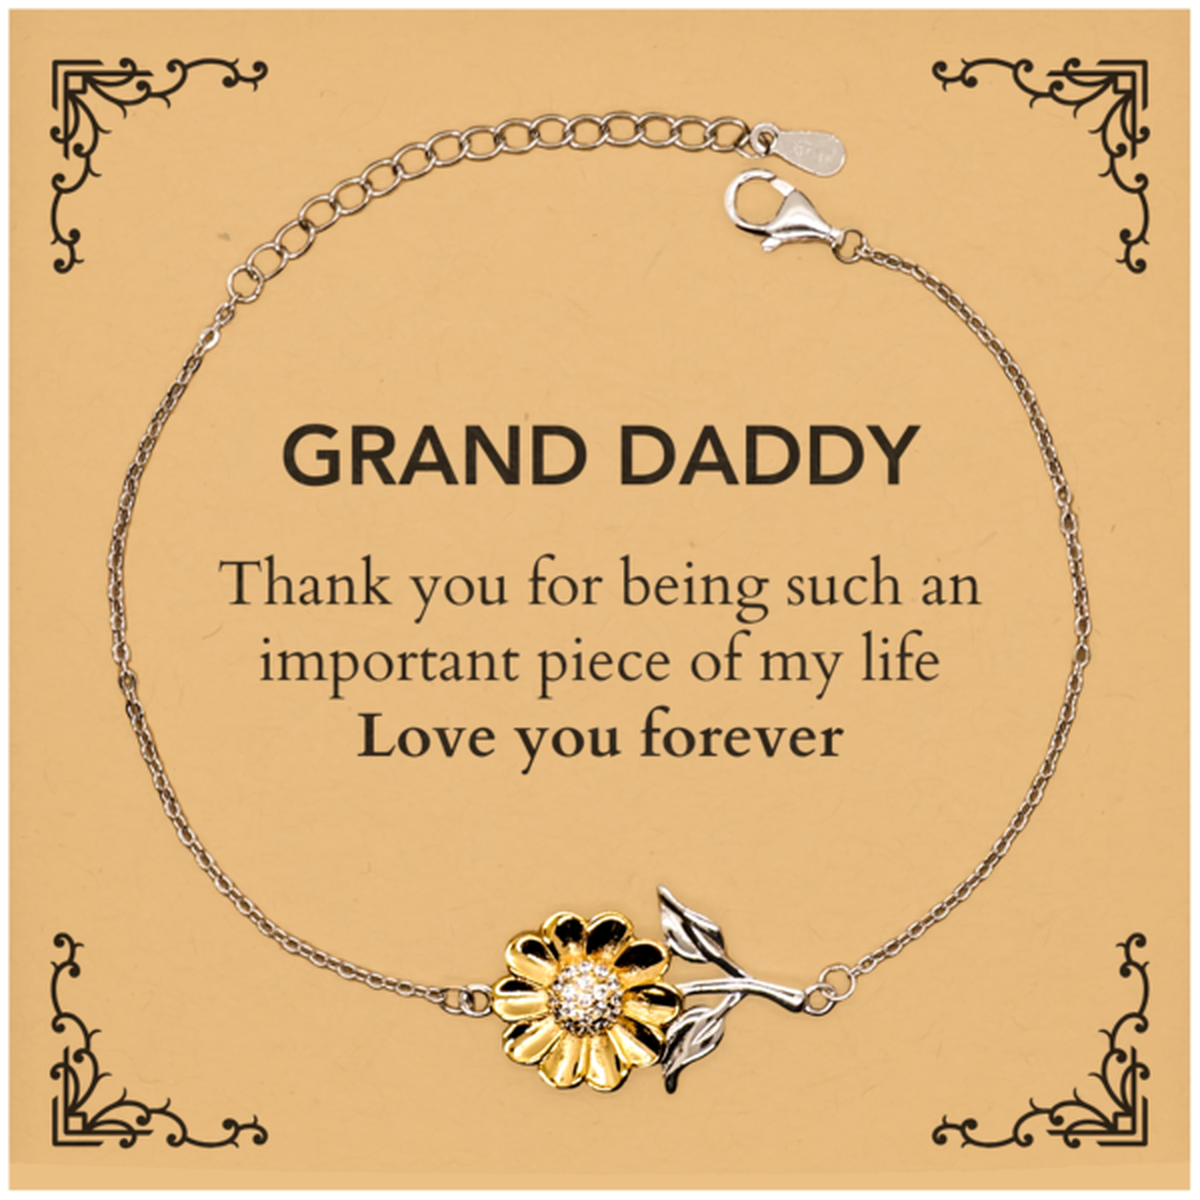 Appropriate Grand Daddy Sunflower Bracelet Epic Birthday Gifts for Grand Daddy Thank you for being such an important piece of my life Grand Daddy Christmas Mothers Fathers Day